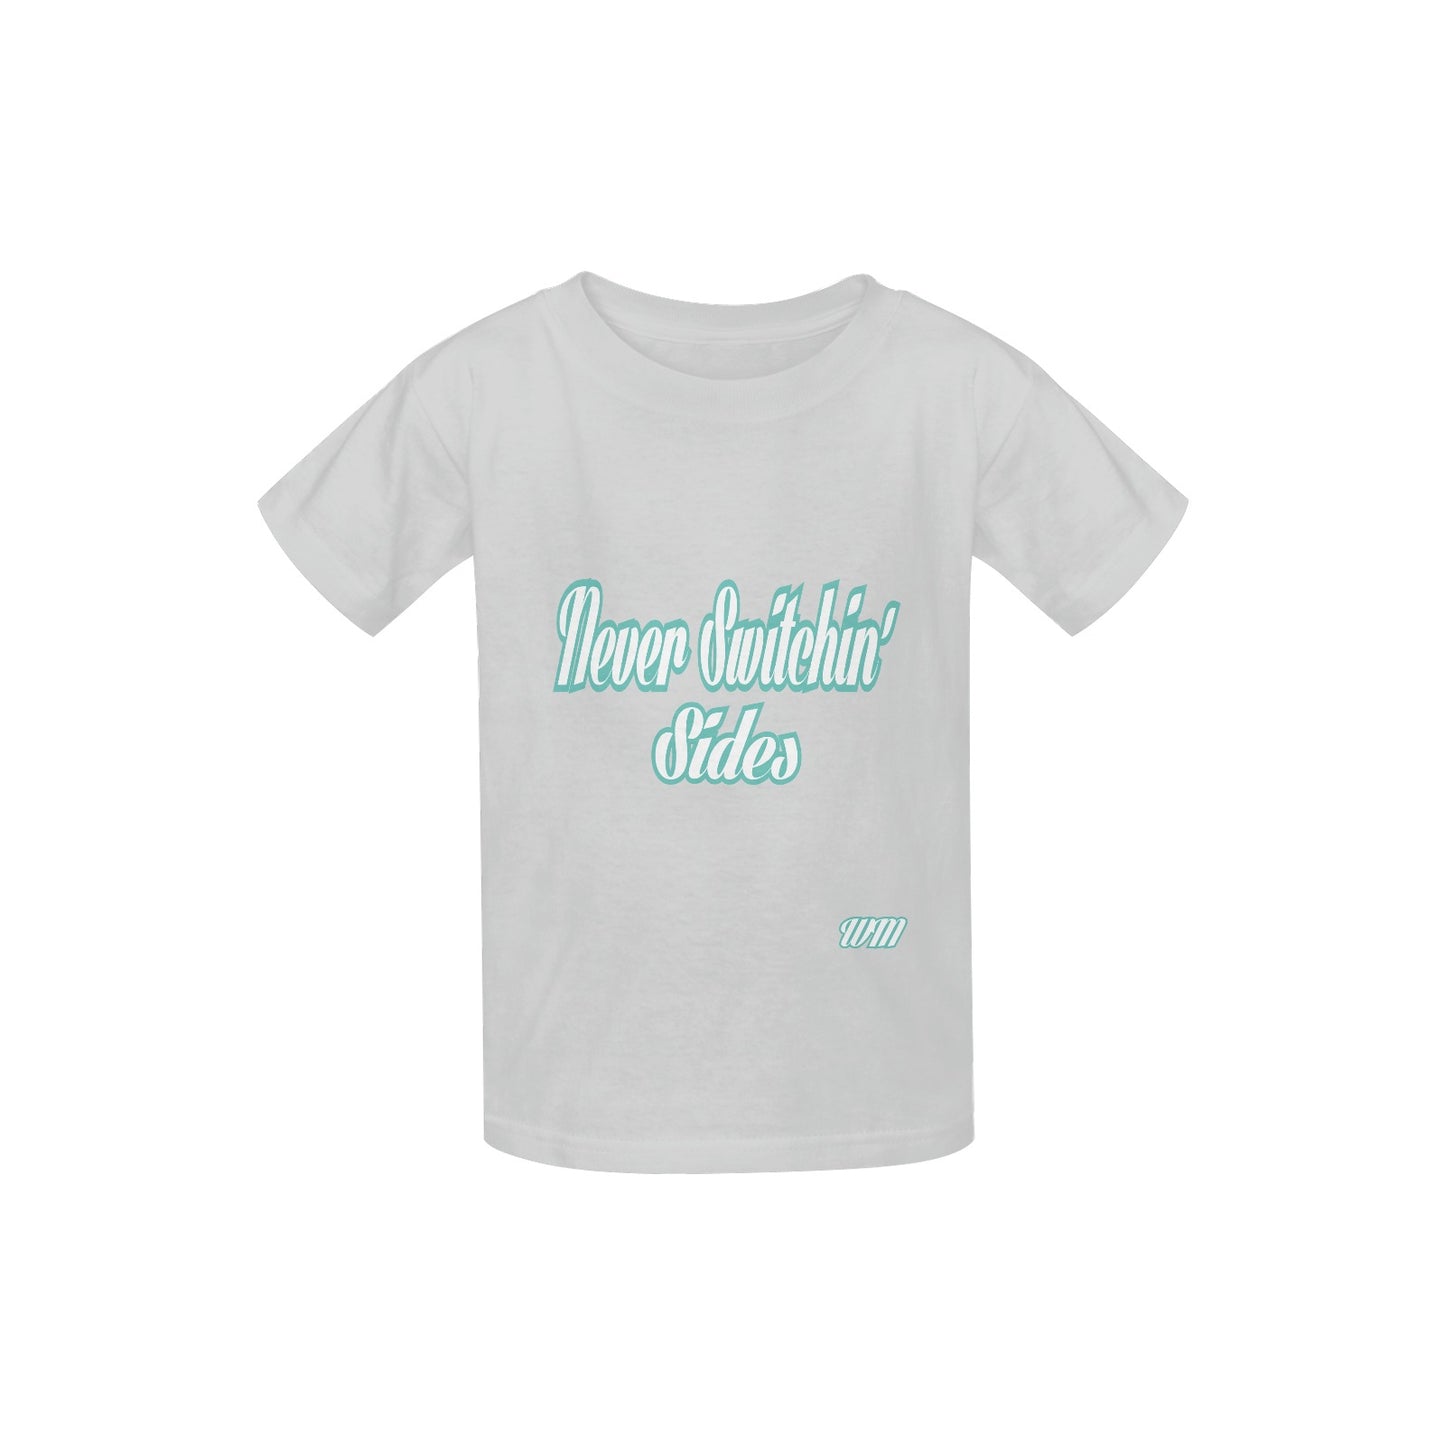 William Michaels "One Side" Unisex Youth Tee (Teal Outline)